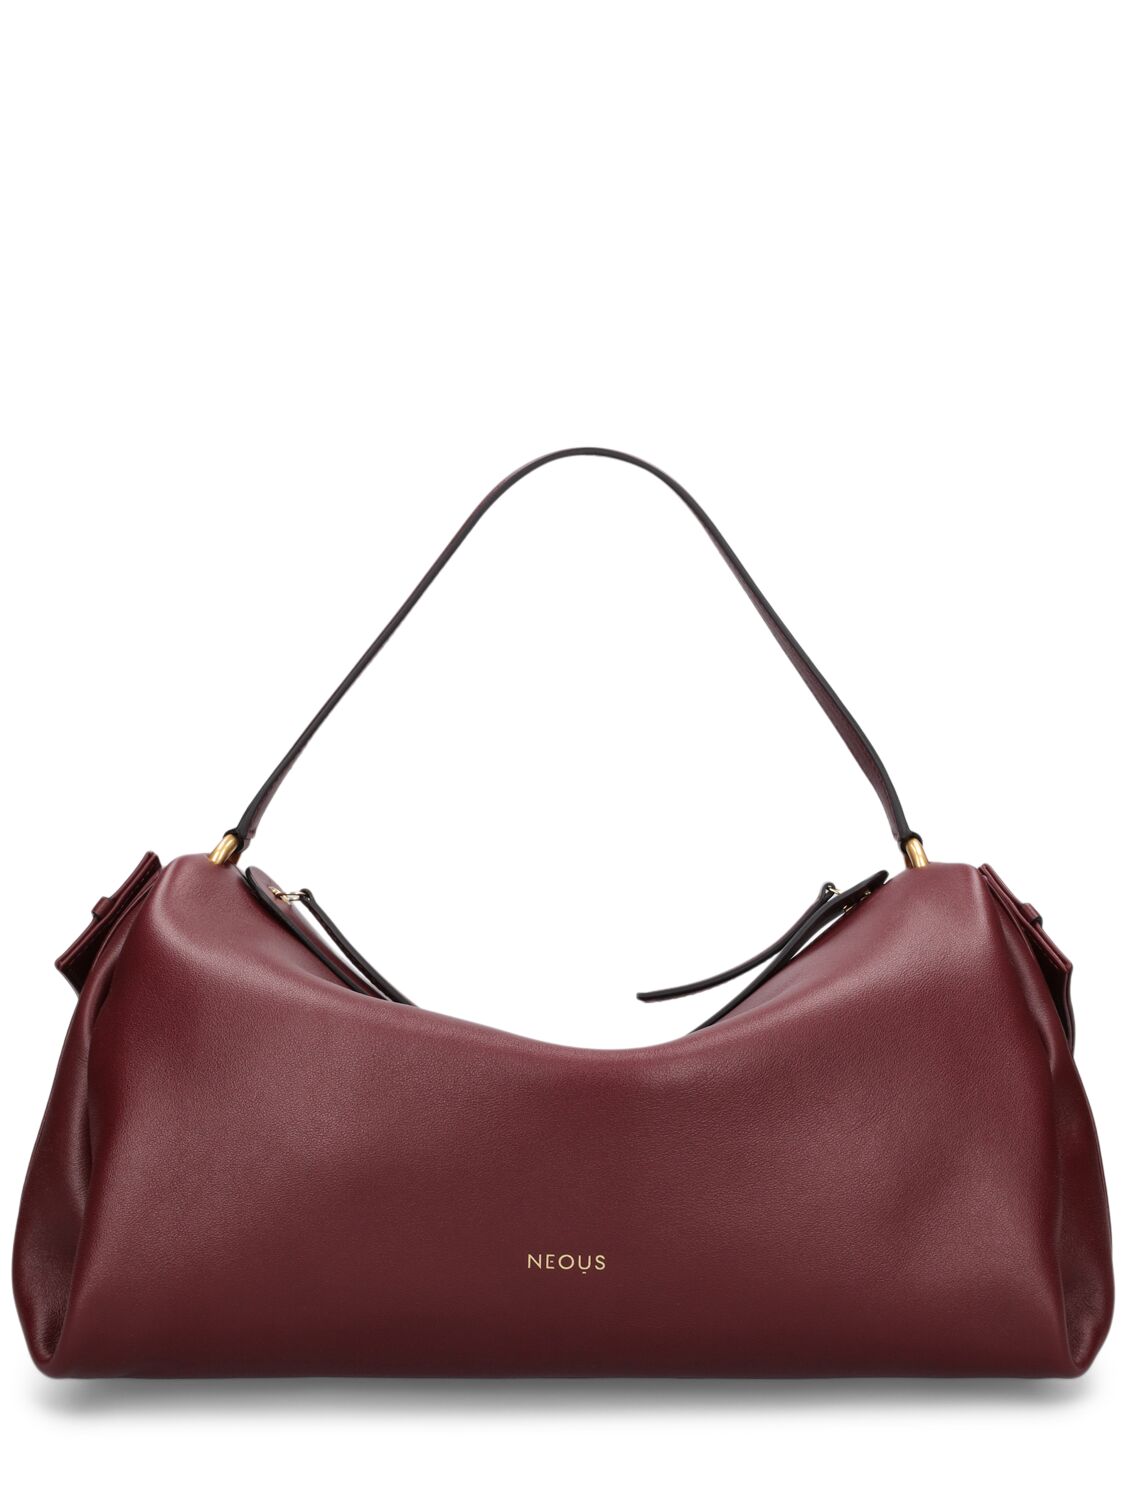 Neous Scorpius Leather Shoulder Bag In Burgundy